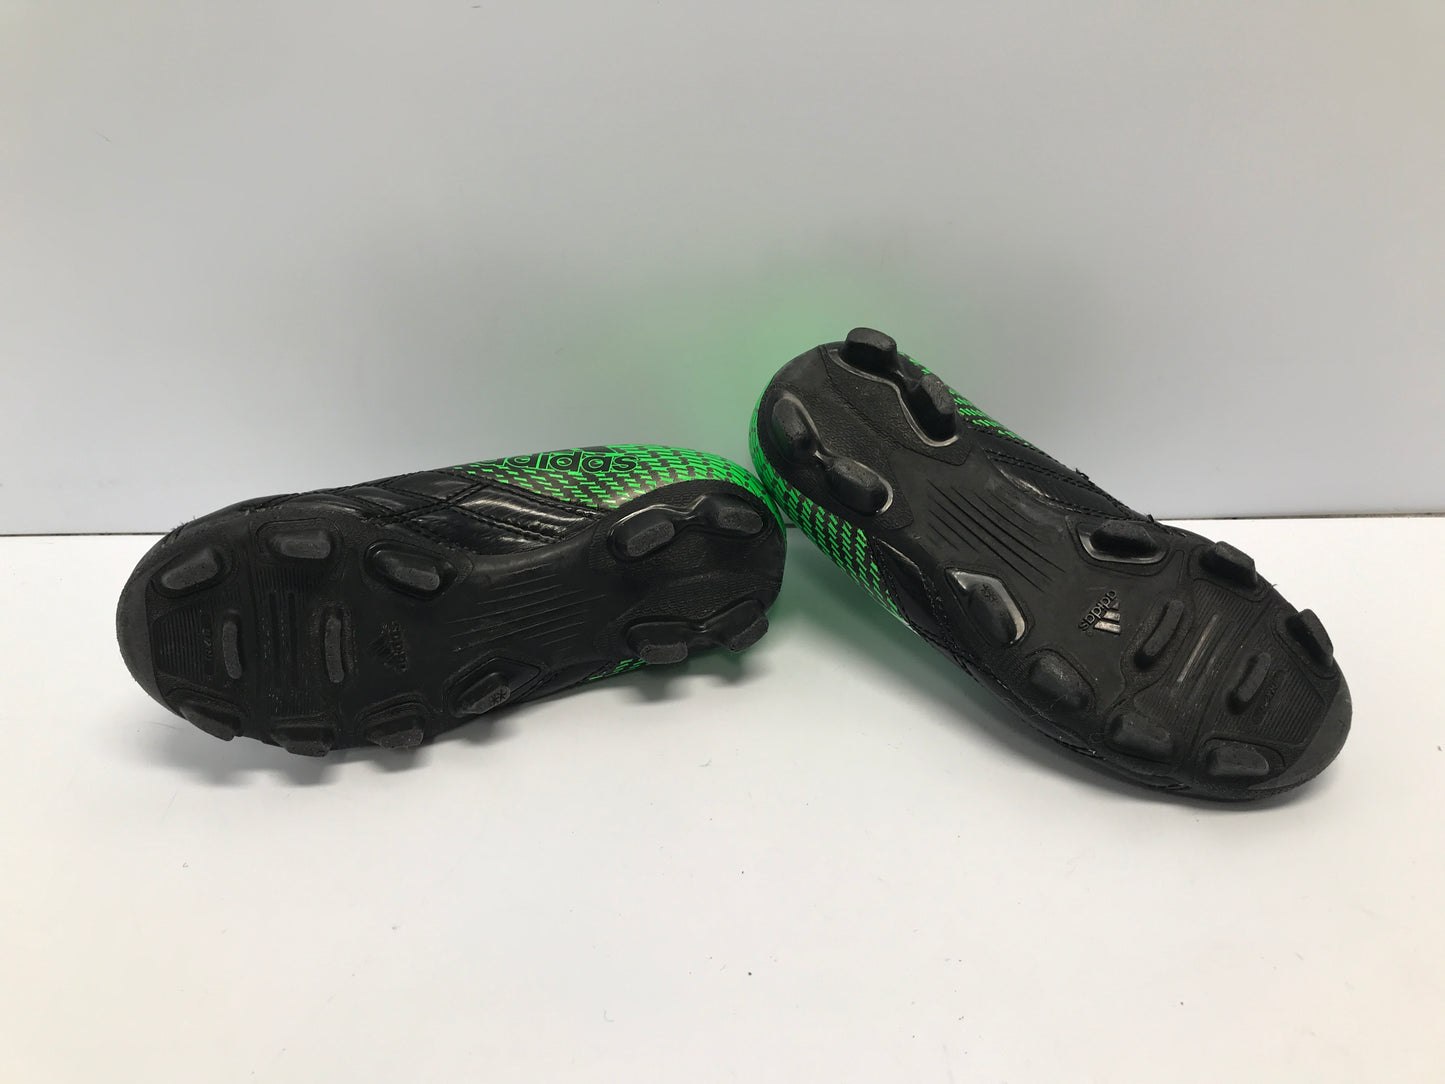 Soccer Shoes Cleats Child Size 11 Adidas Green Black Excellent